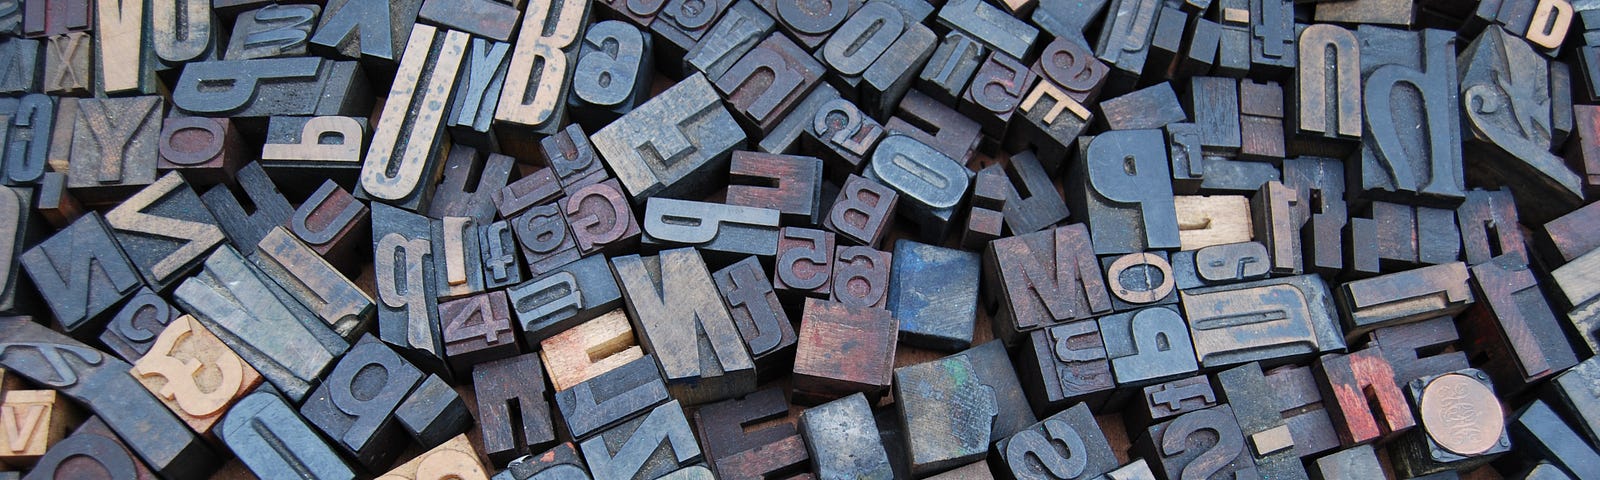 Photo of typesetting letters of various shapes and sizes.